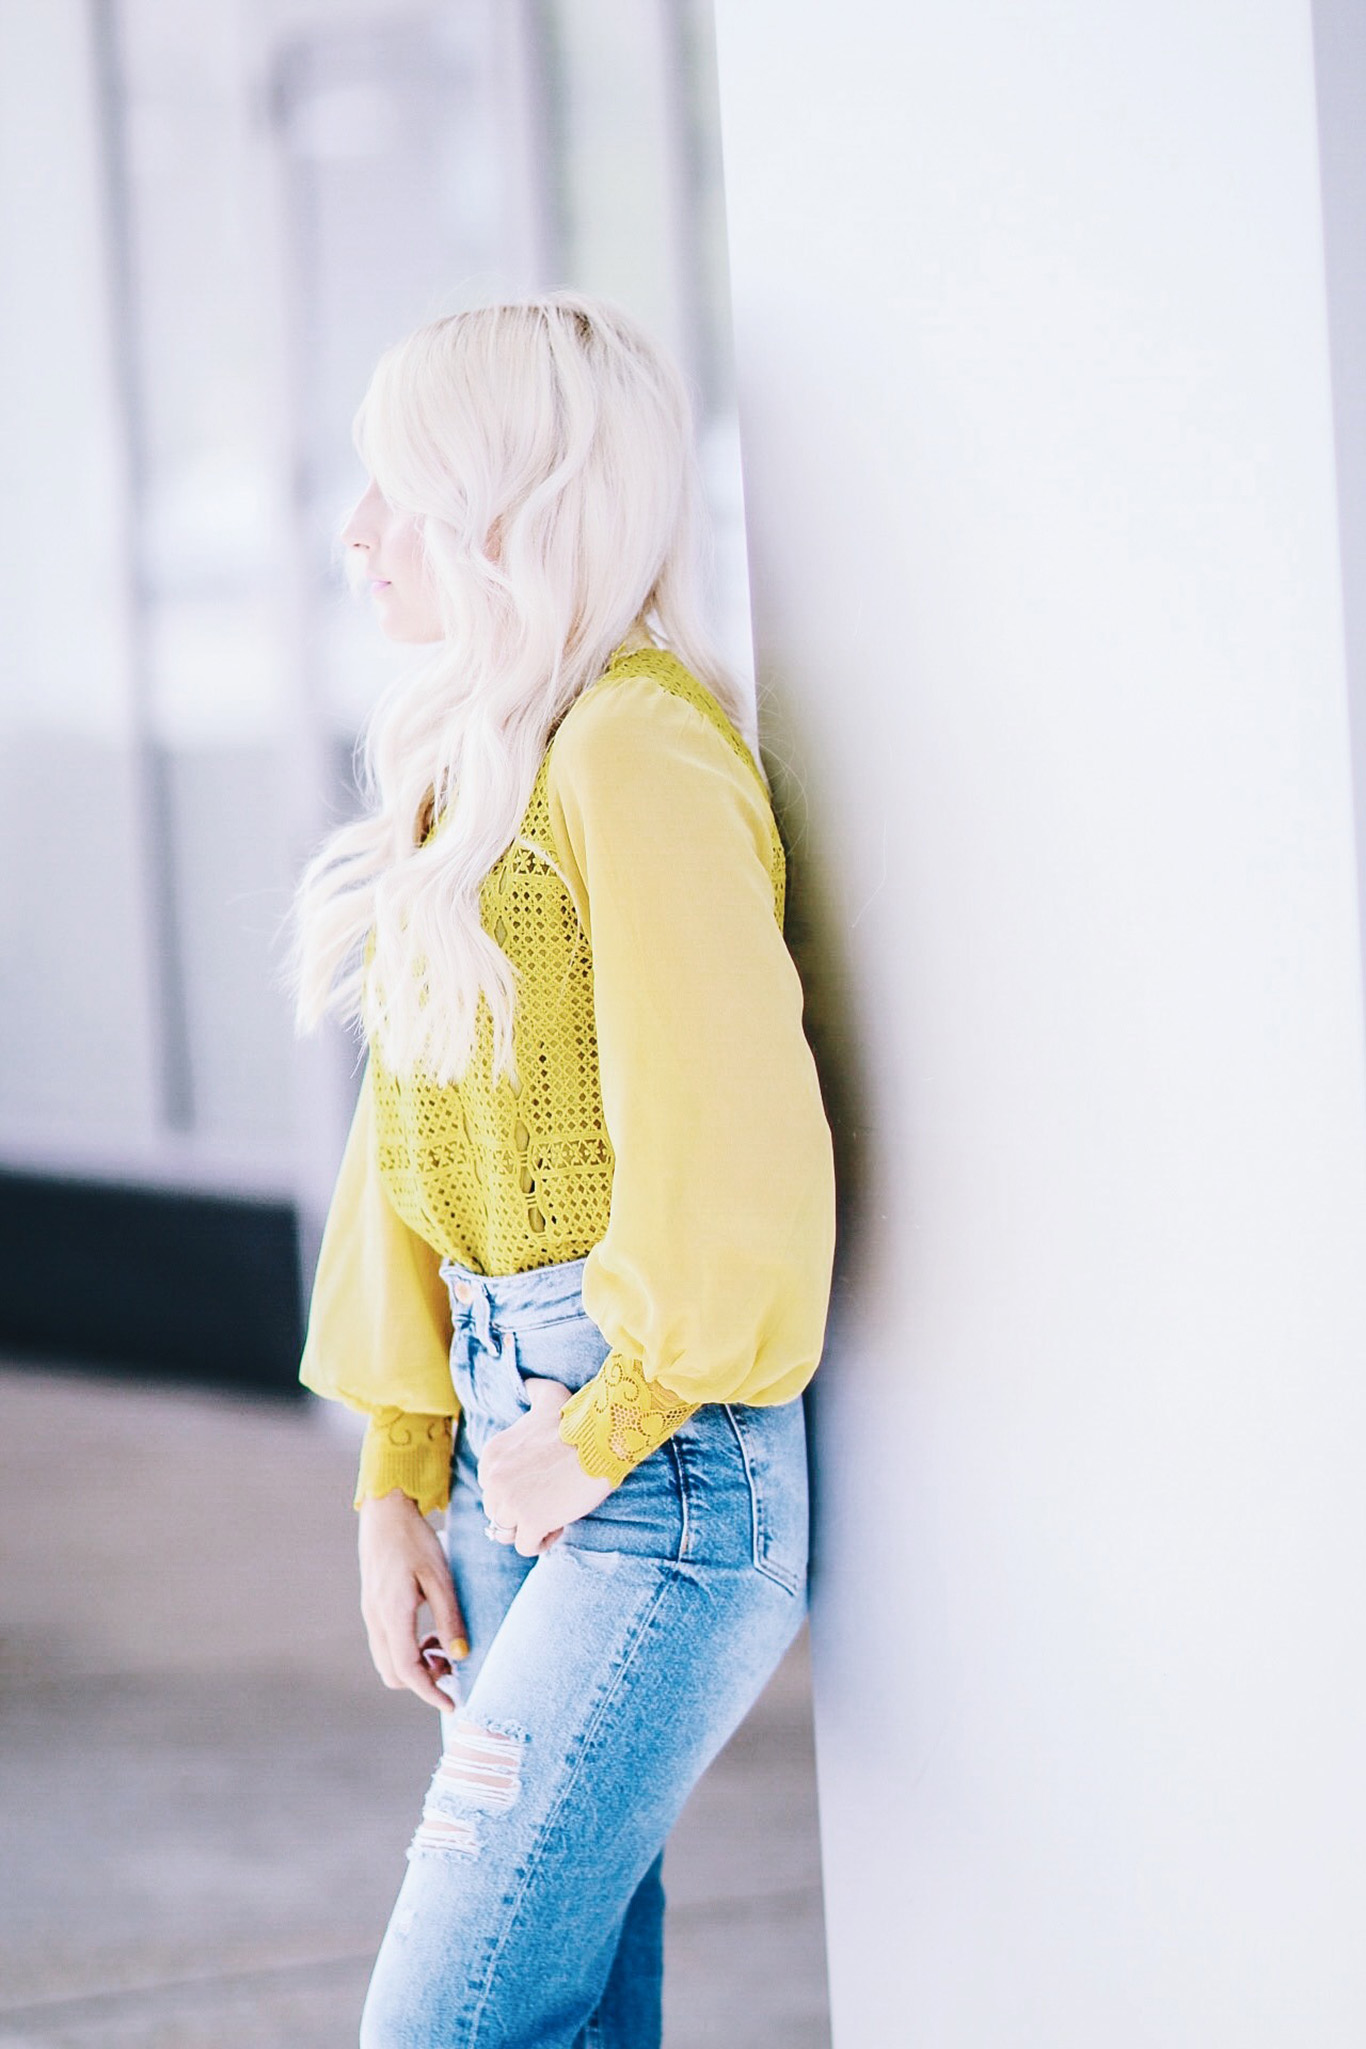 Alena Gidenko of modaprints.com styles a yellow lace top with high waisted mom jeans